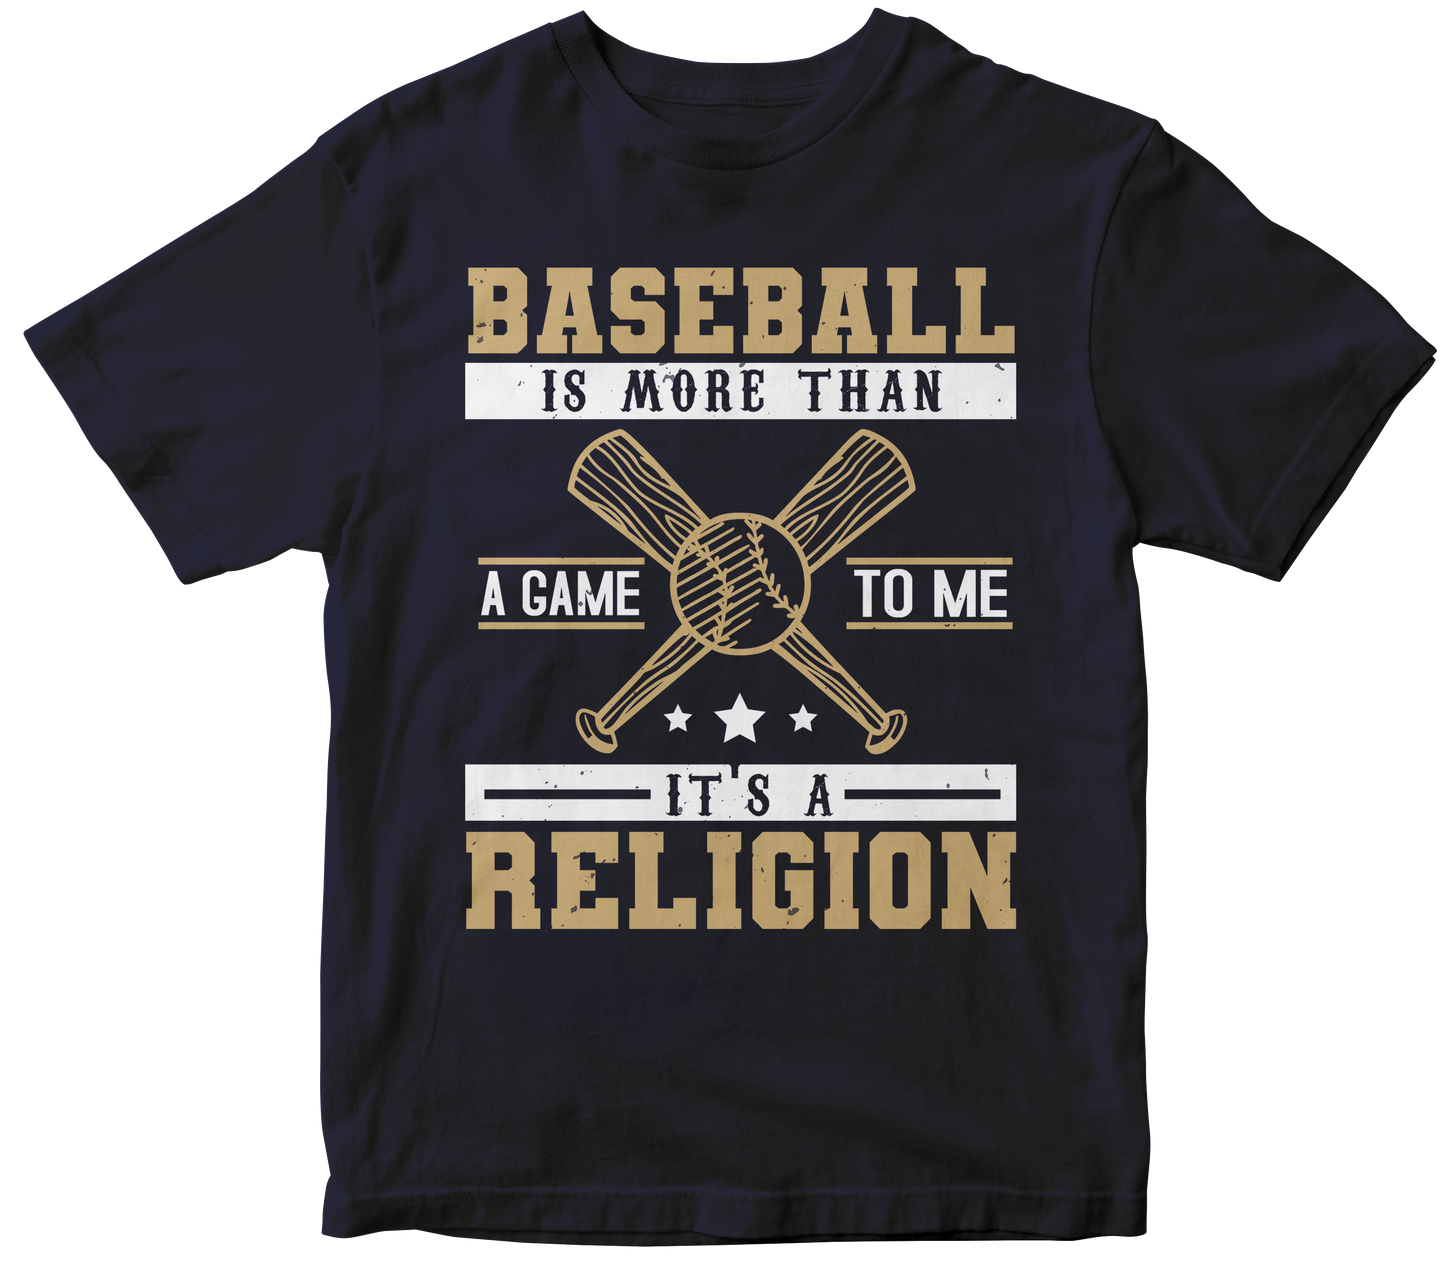 Baseball is more than a game to me, it's a religion